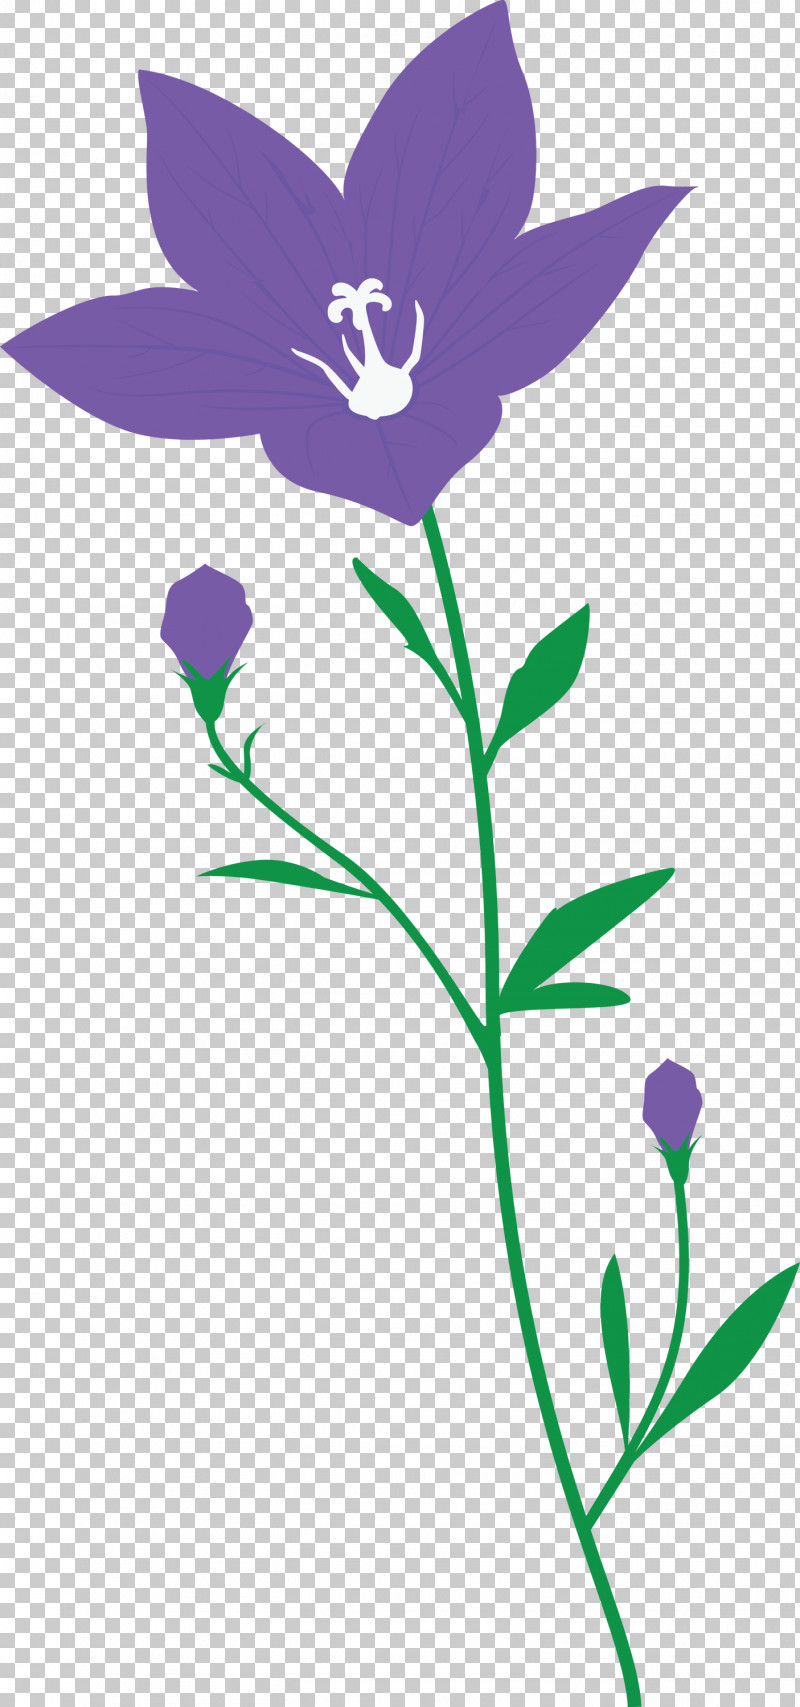 Balloon Flower PNG, Clipart, Balloon Flower, Flora, Floral Design, Flower, Herbaceous Plant Free PNG Download